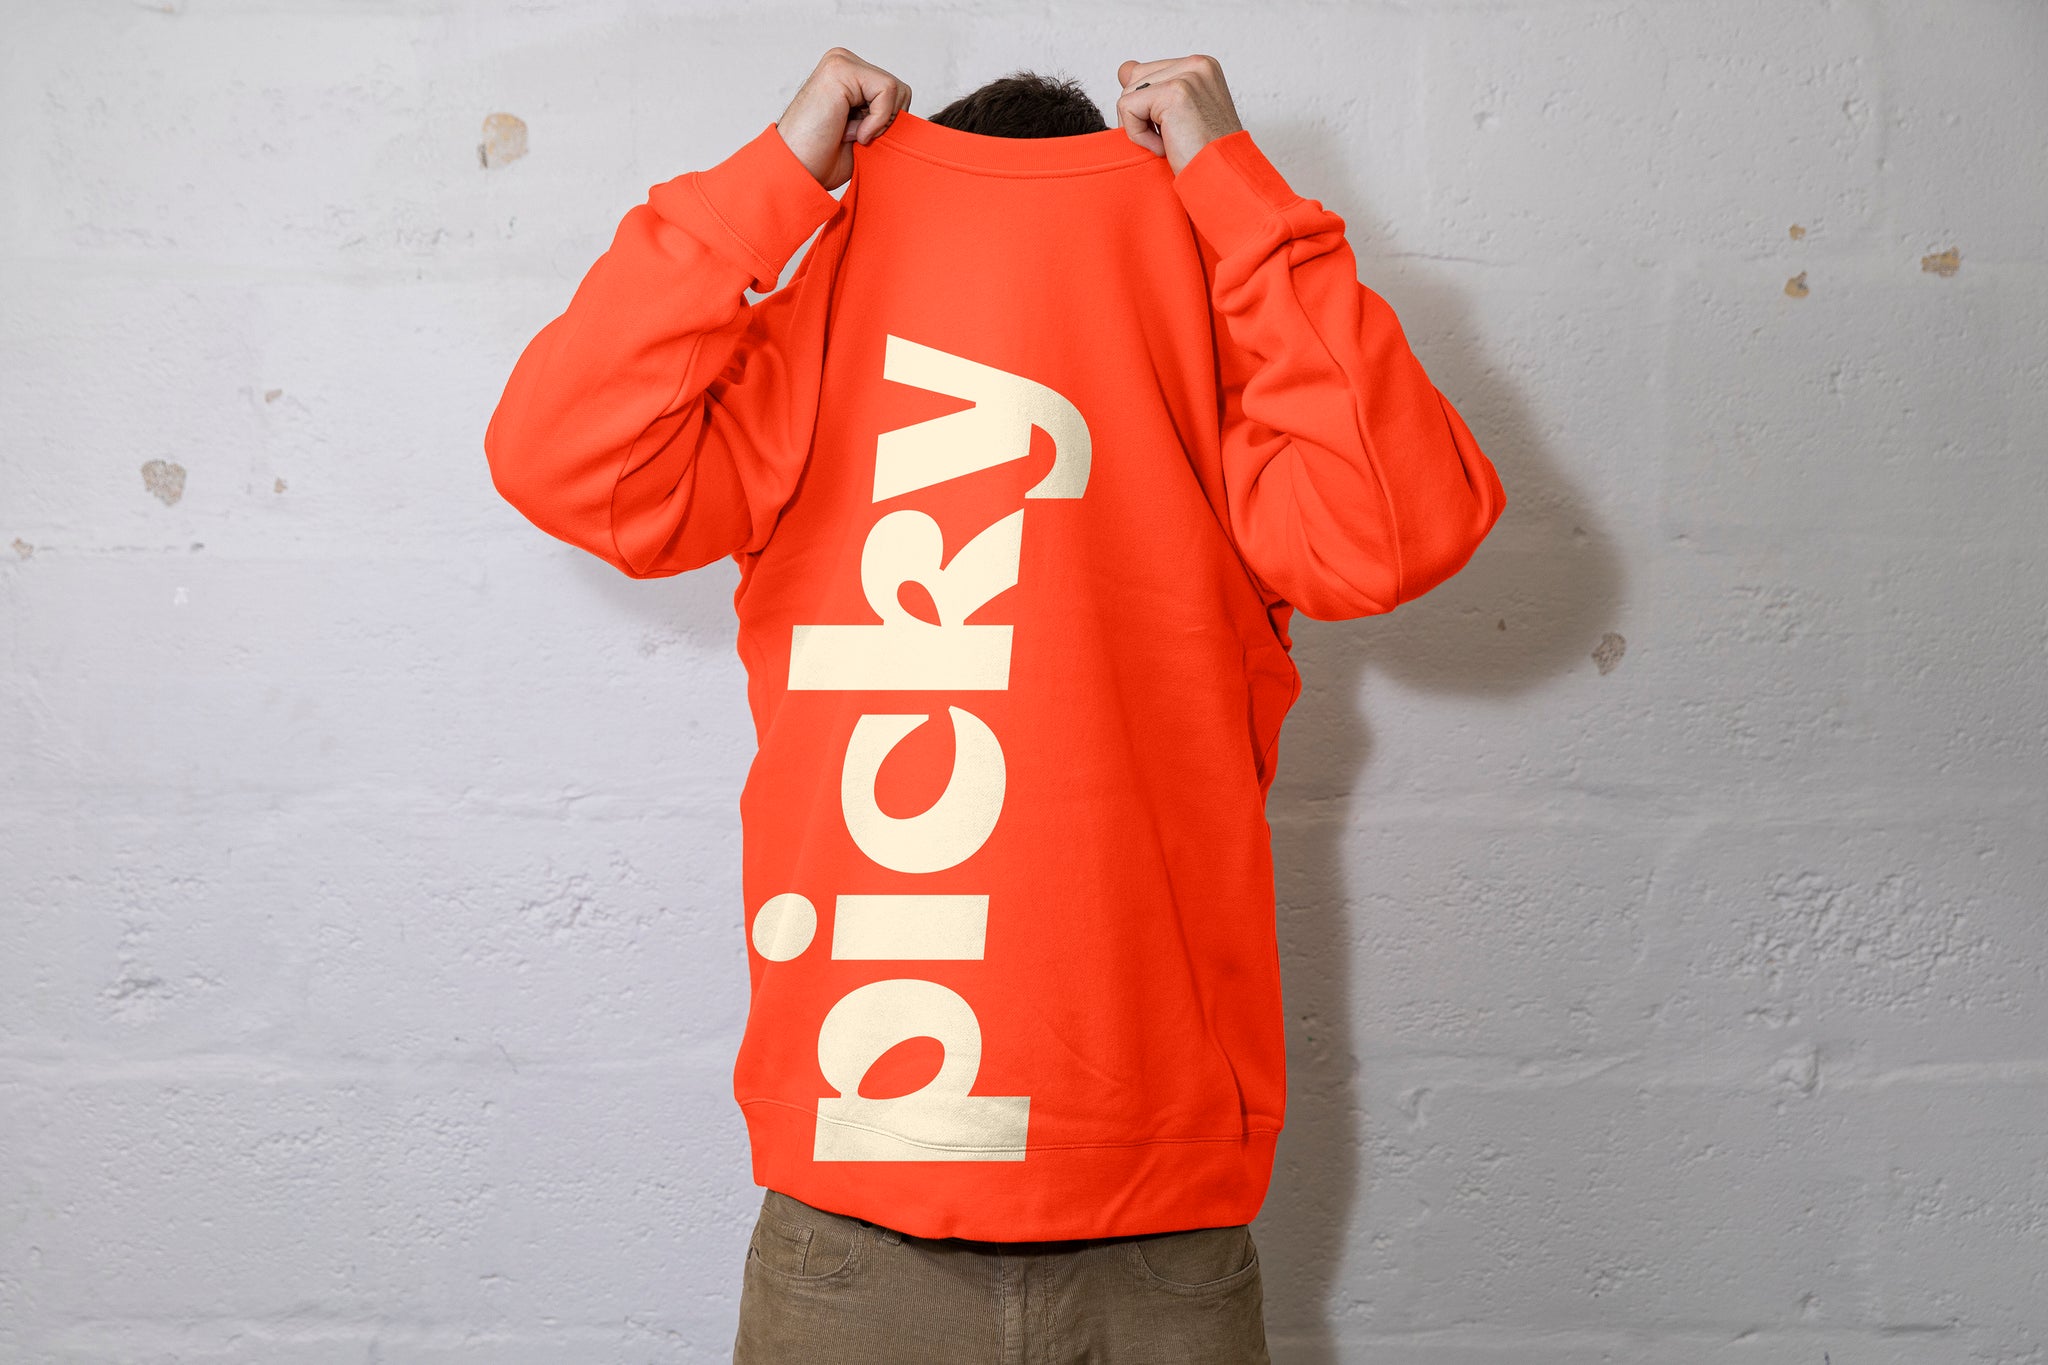 Person pulling a large orange jumper over their head. Can see the top of their dark hair. The word Picky is written in a bold font vertically up the jersey. White cinderbock background. 